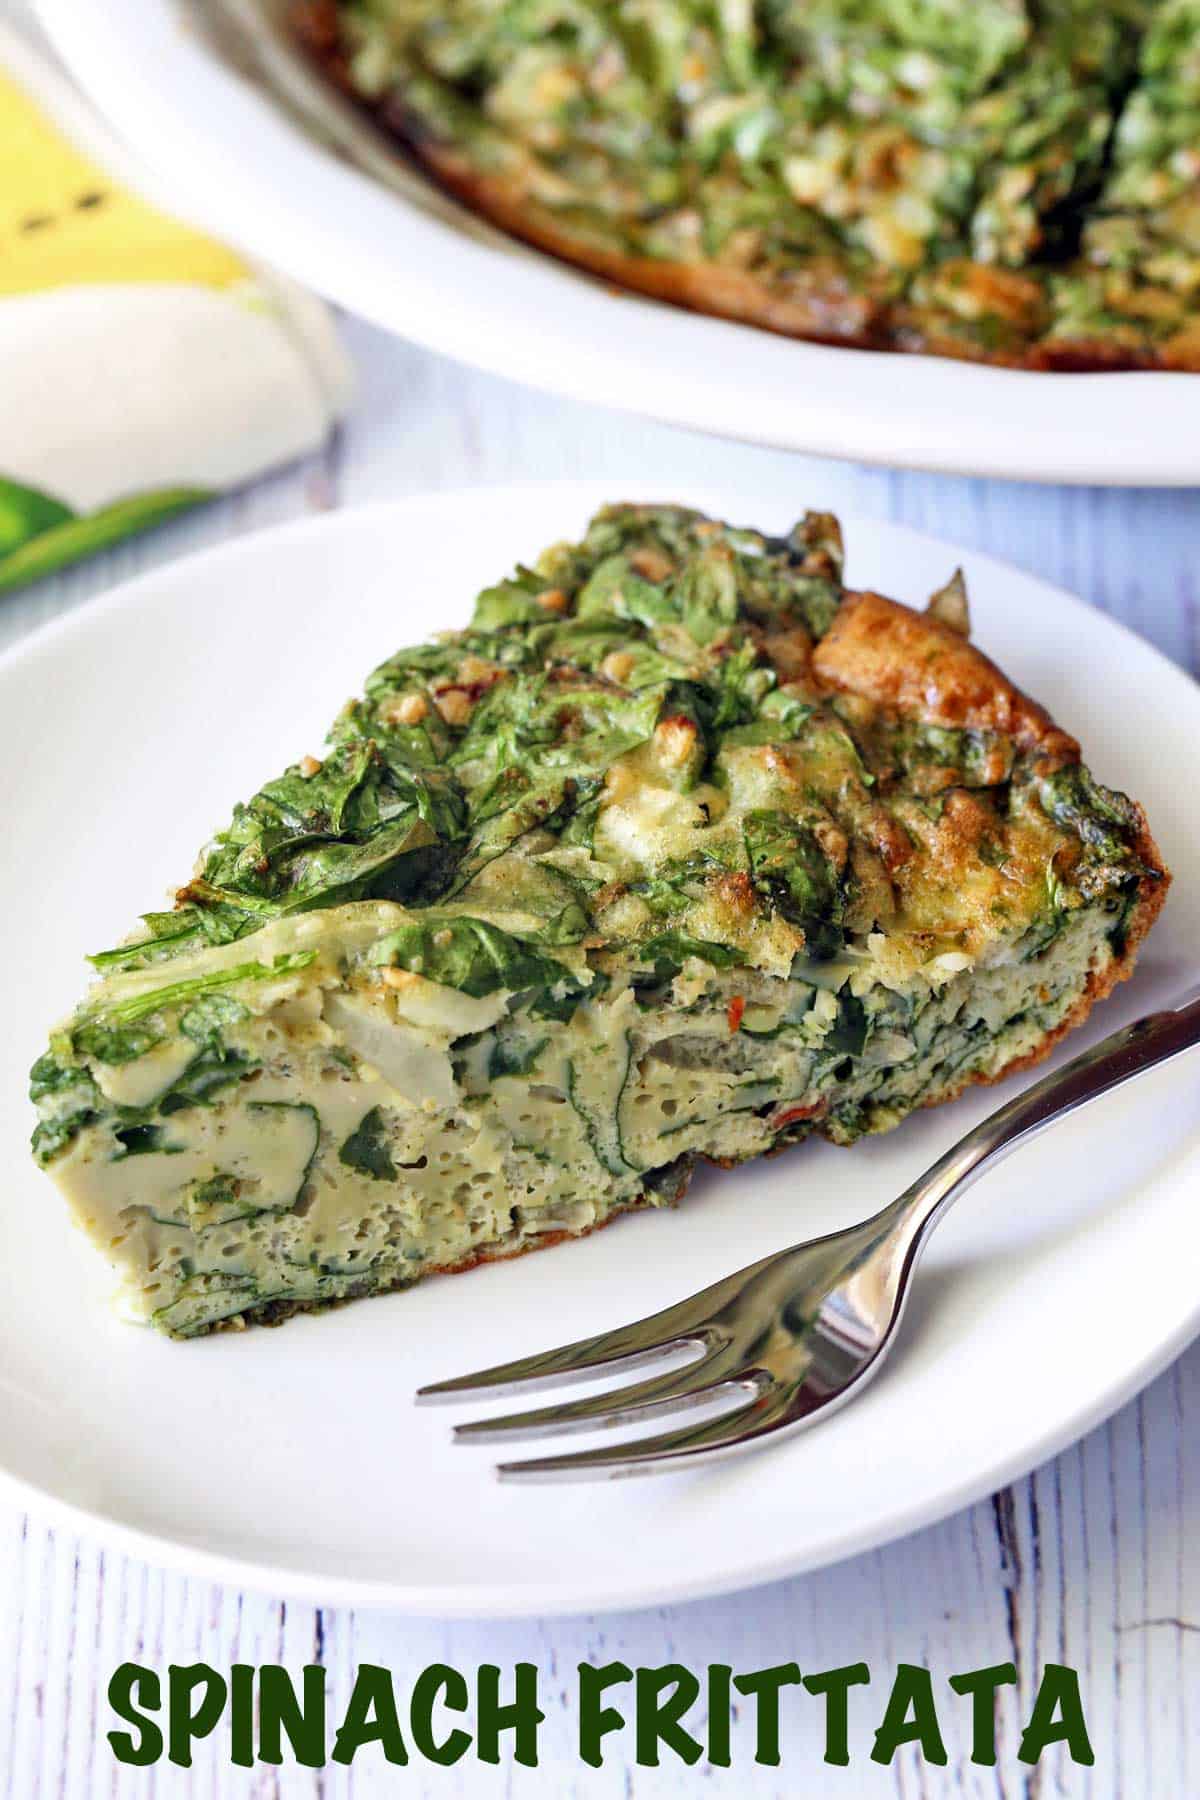 A slice of spinach frittata served on a plate with a fork.